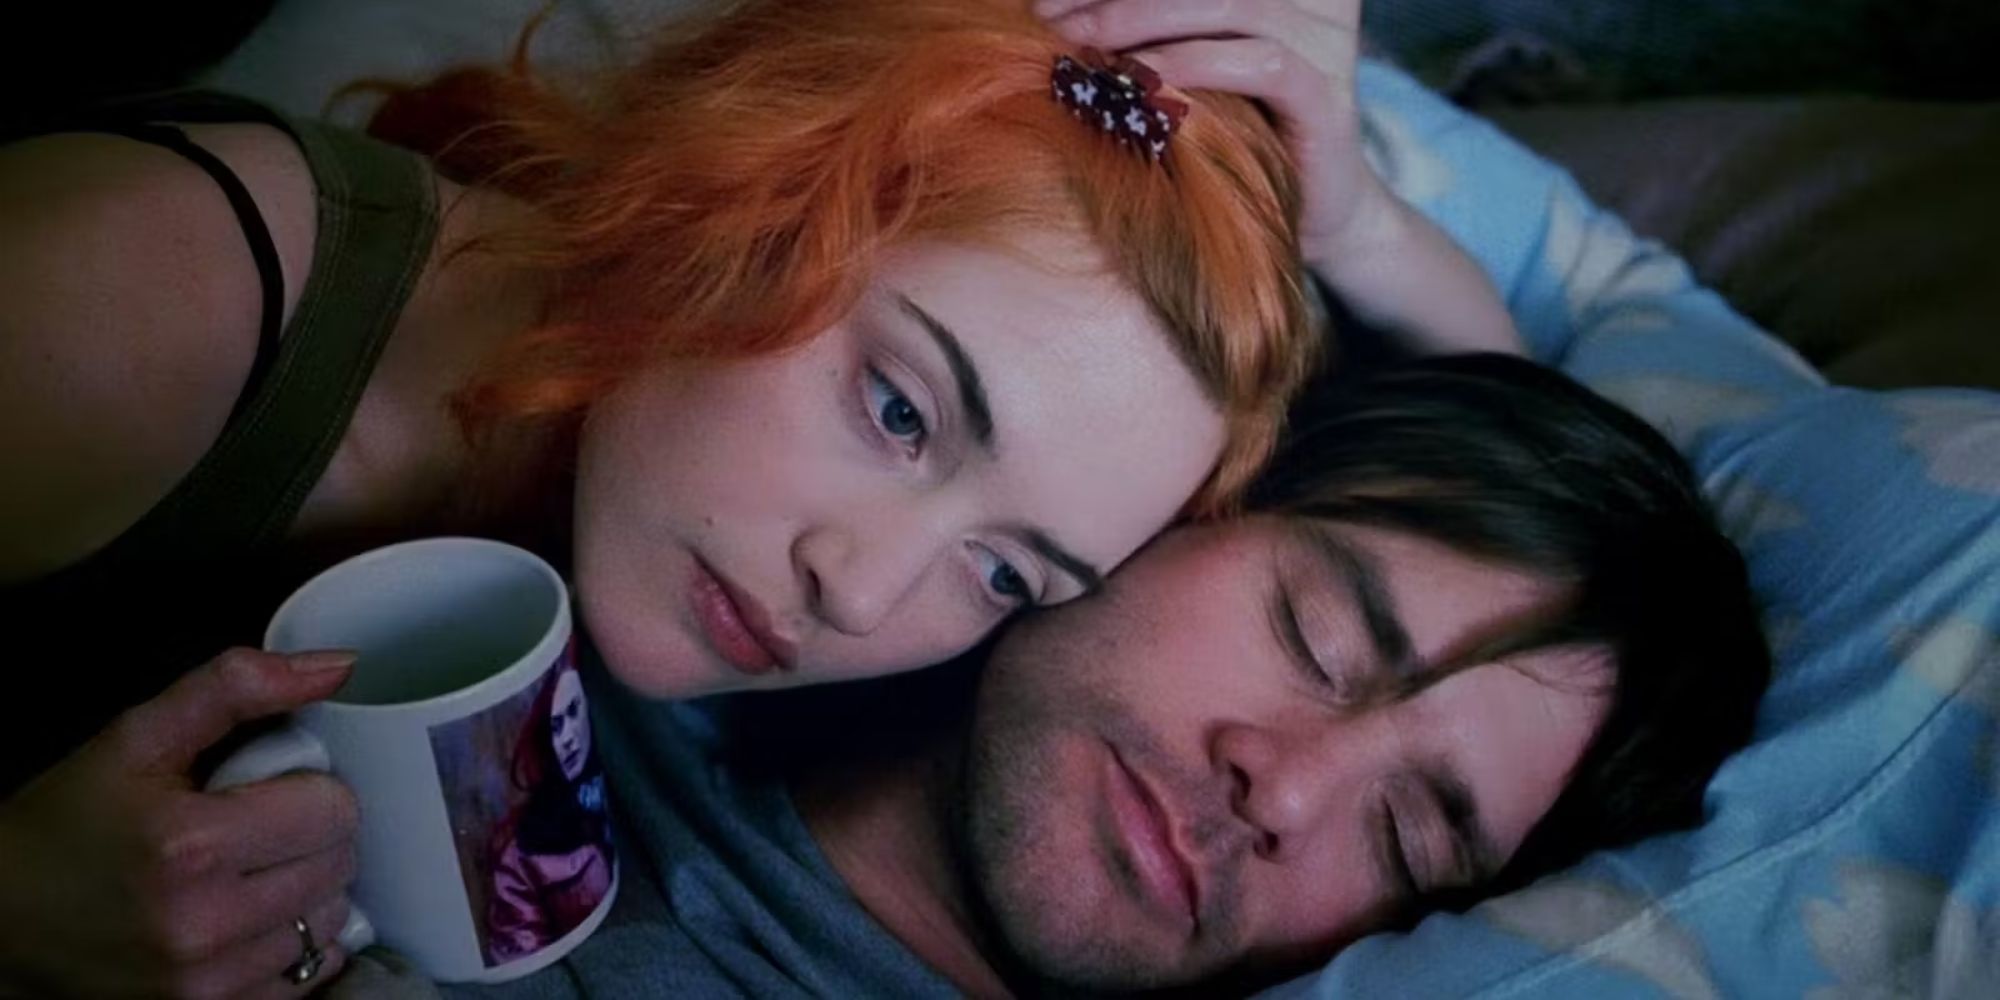 Eternal Sunshine of the Spotless Mind starring Jim Carrey and Kate Winslet